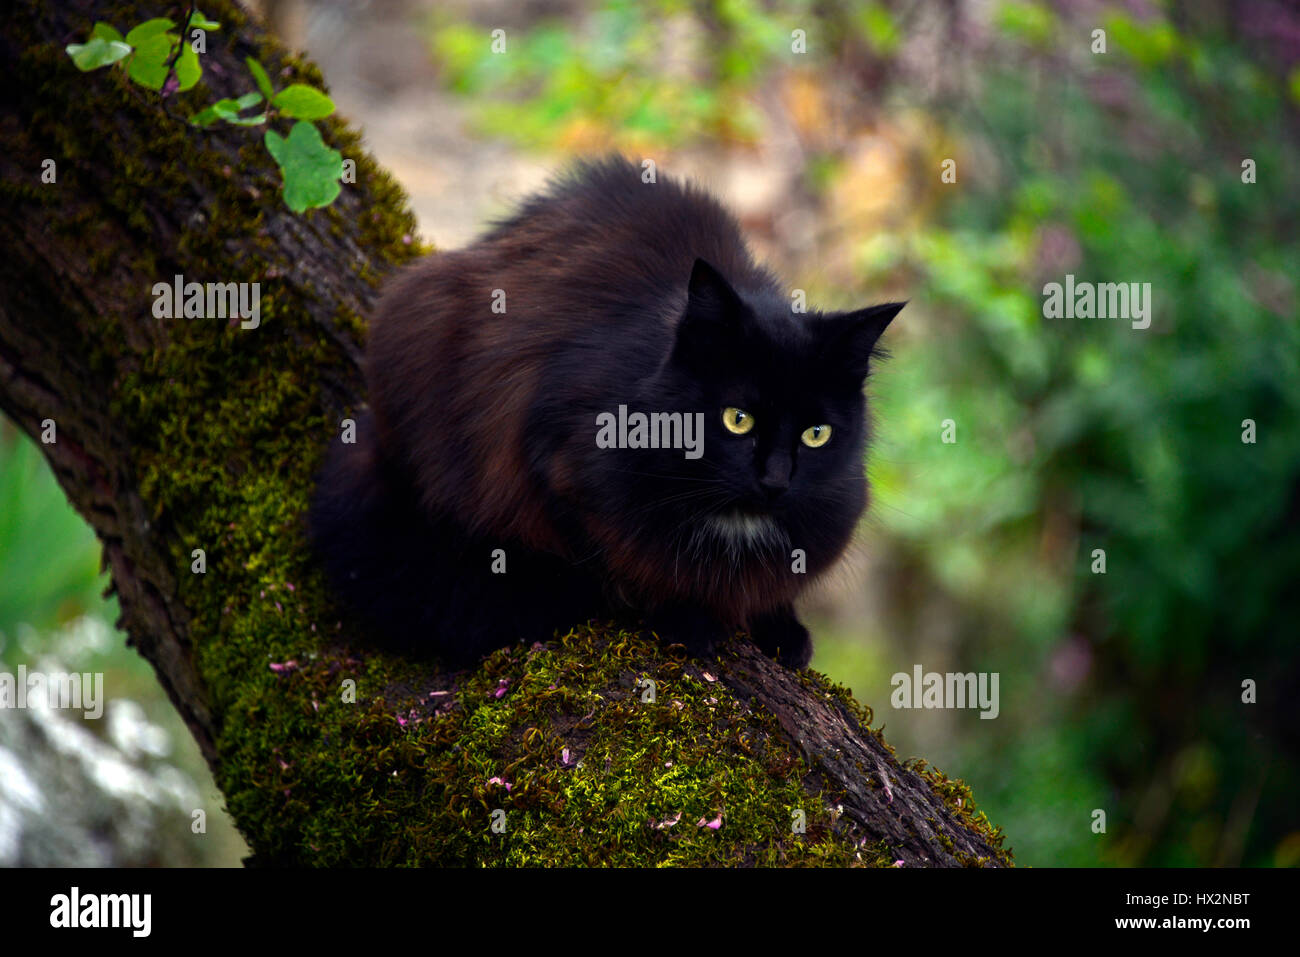 Yellow eyed, black cat sitting on a lichen covered tree branch. Stock Photo